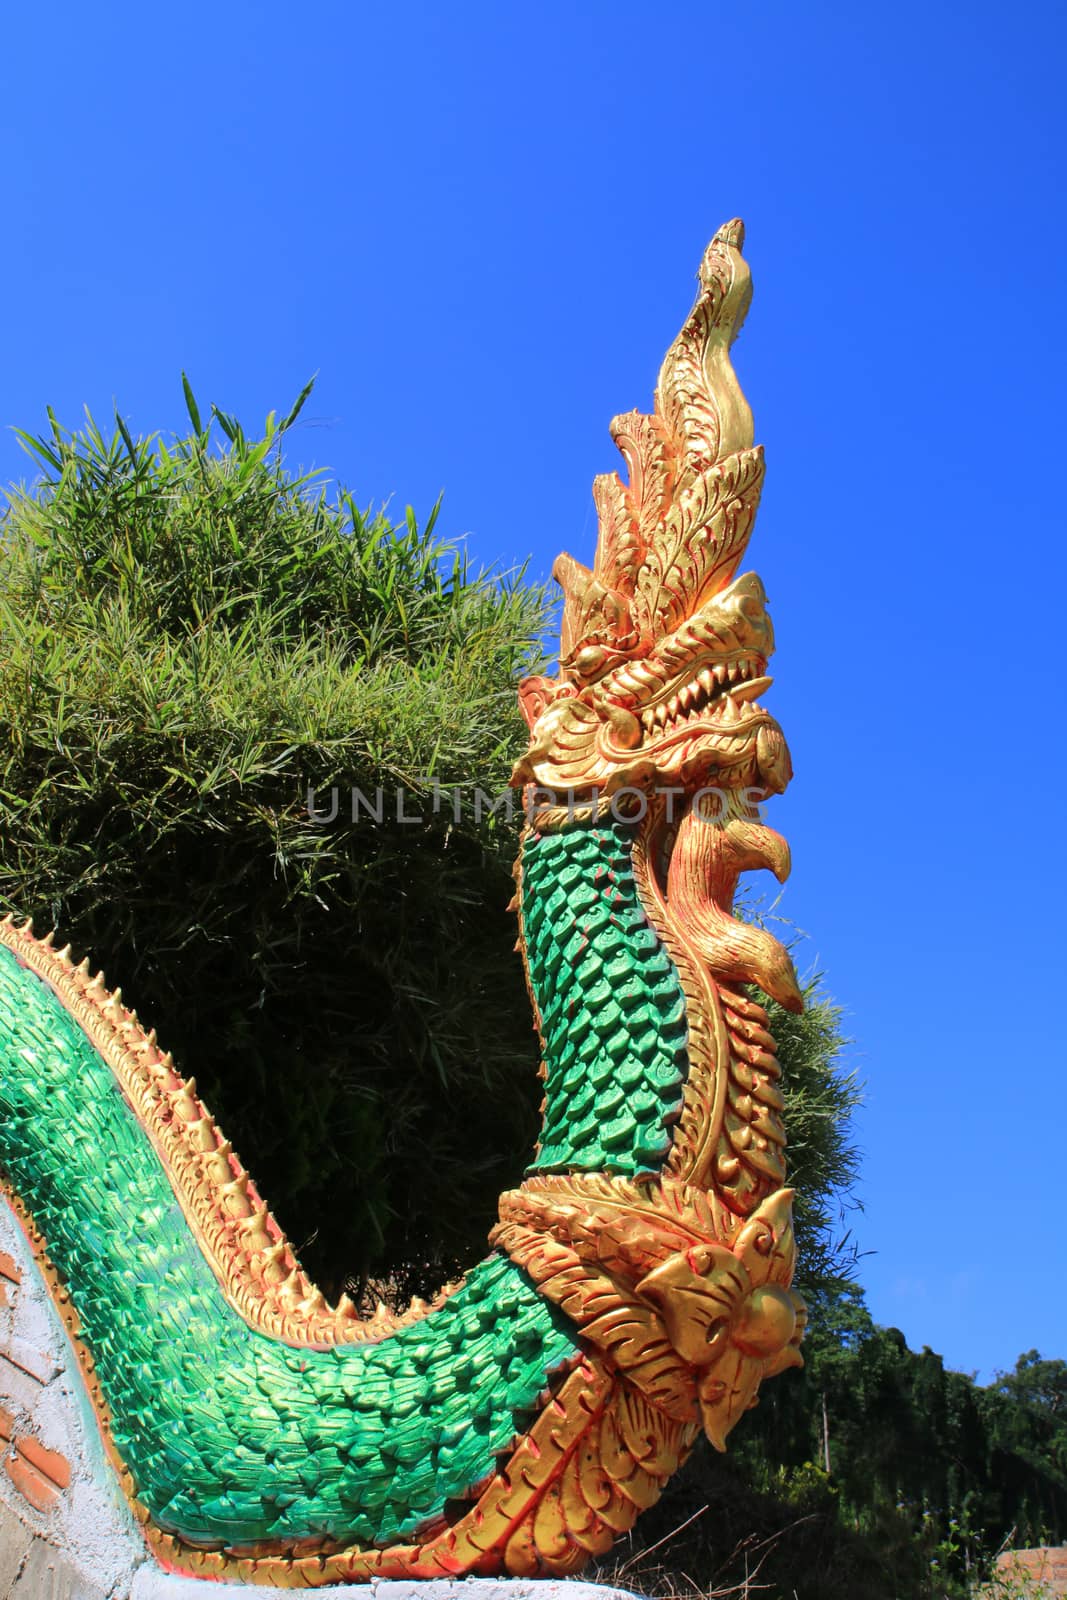 The sculpture king of nagas usually decor at the stair in public temple of Thailand.